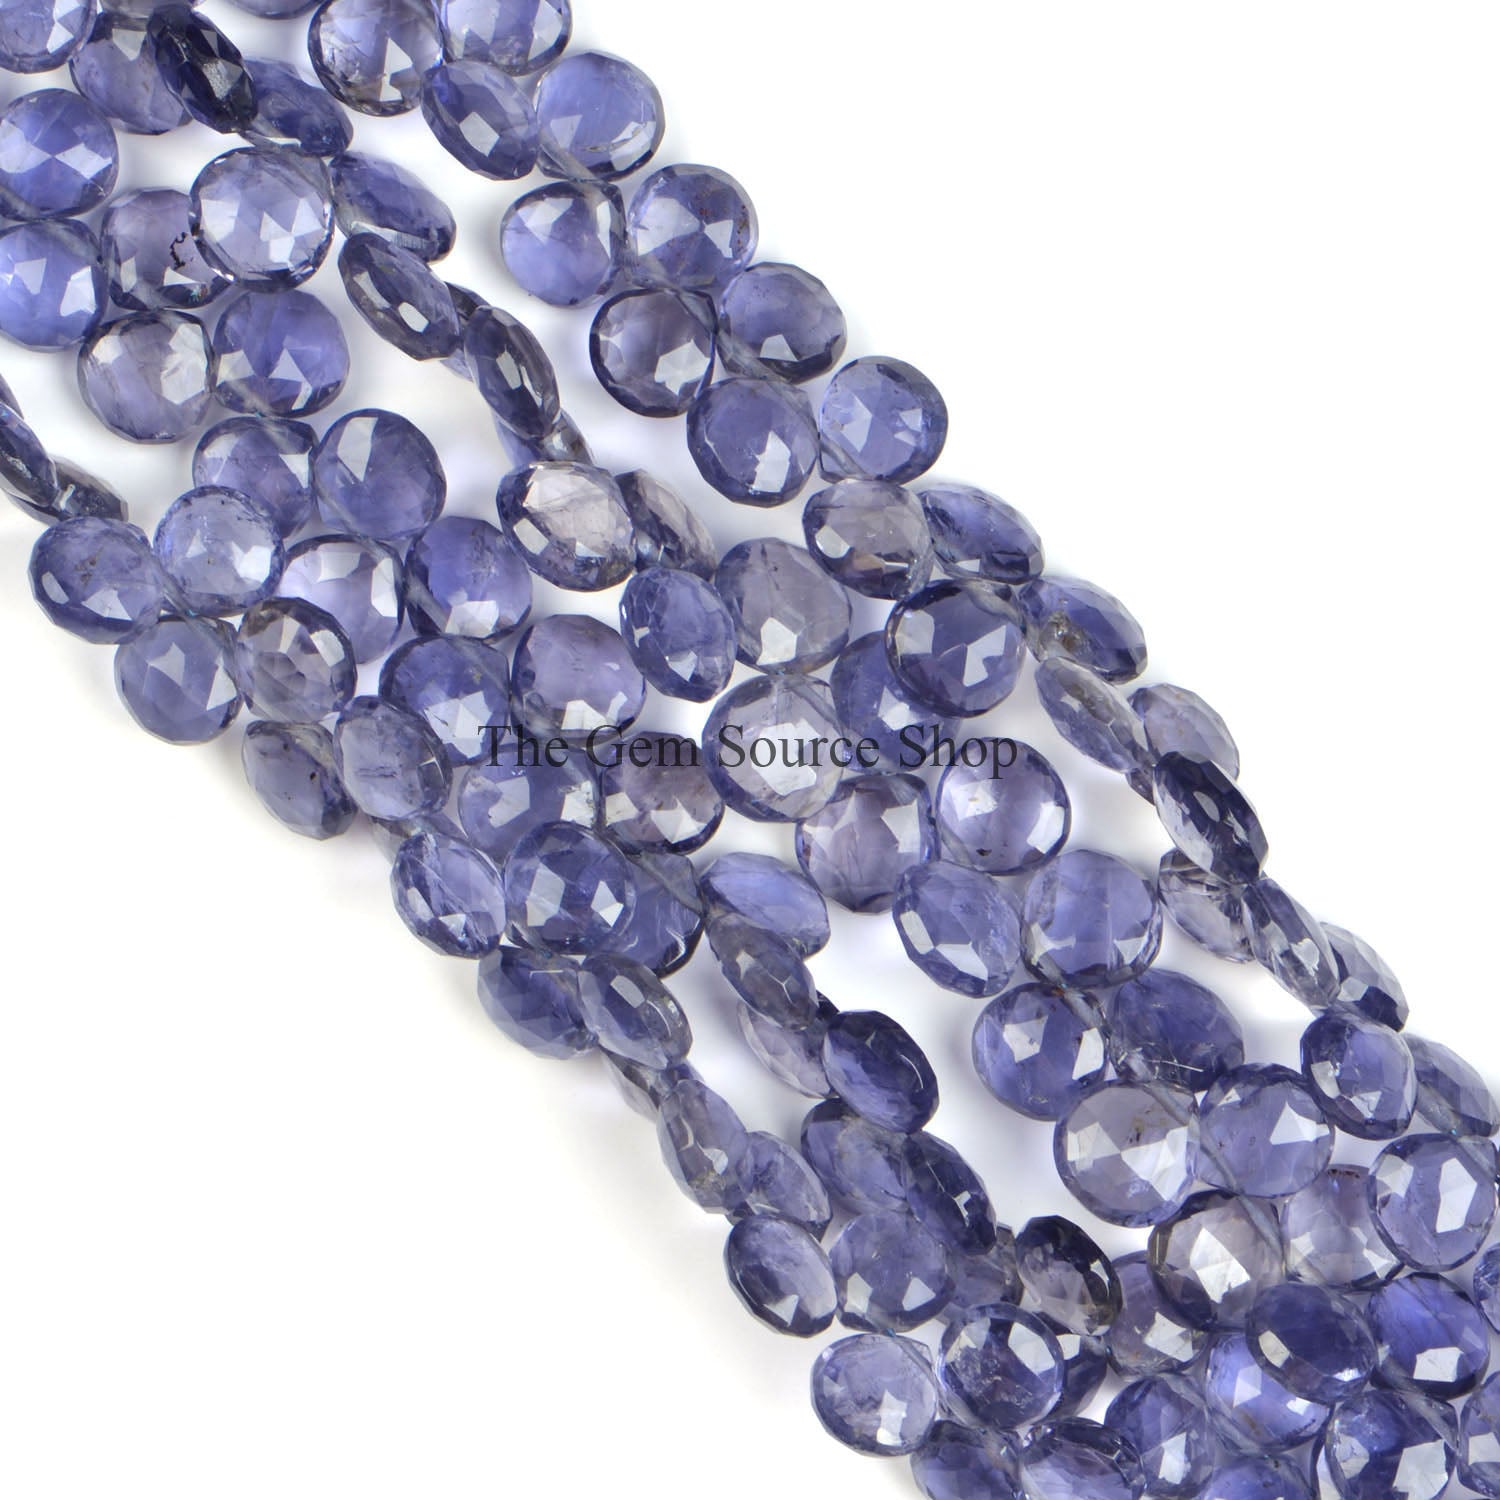 Iolite Faceted Beads, Iolite Heart Shape Beads, Heart Briolette Beads, Wholesale Gemstone Beads